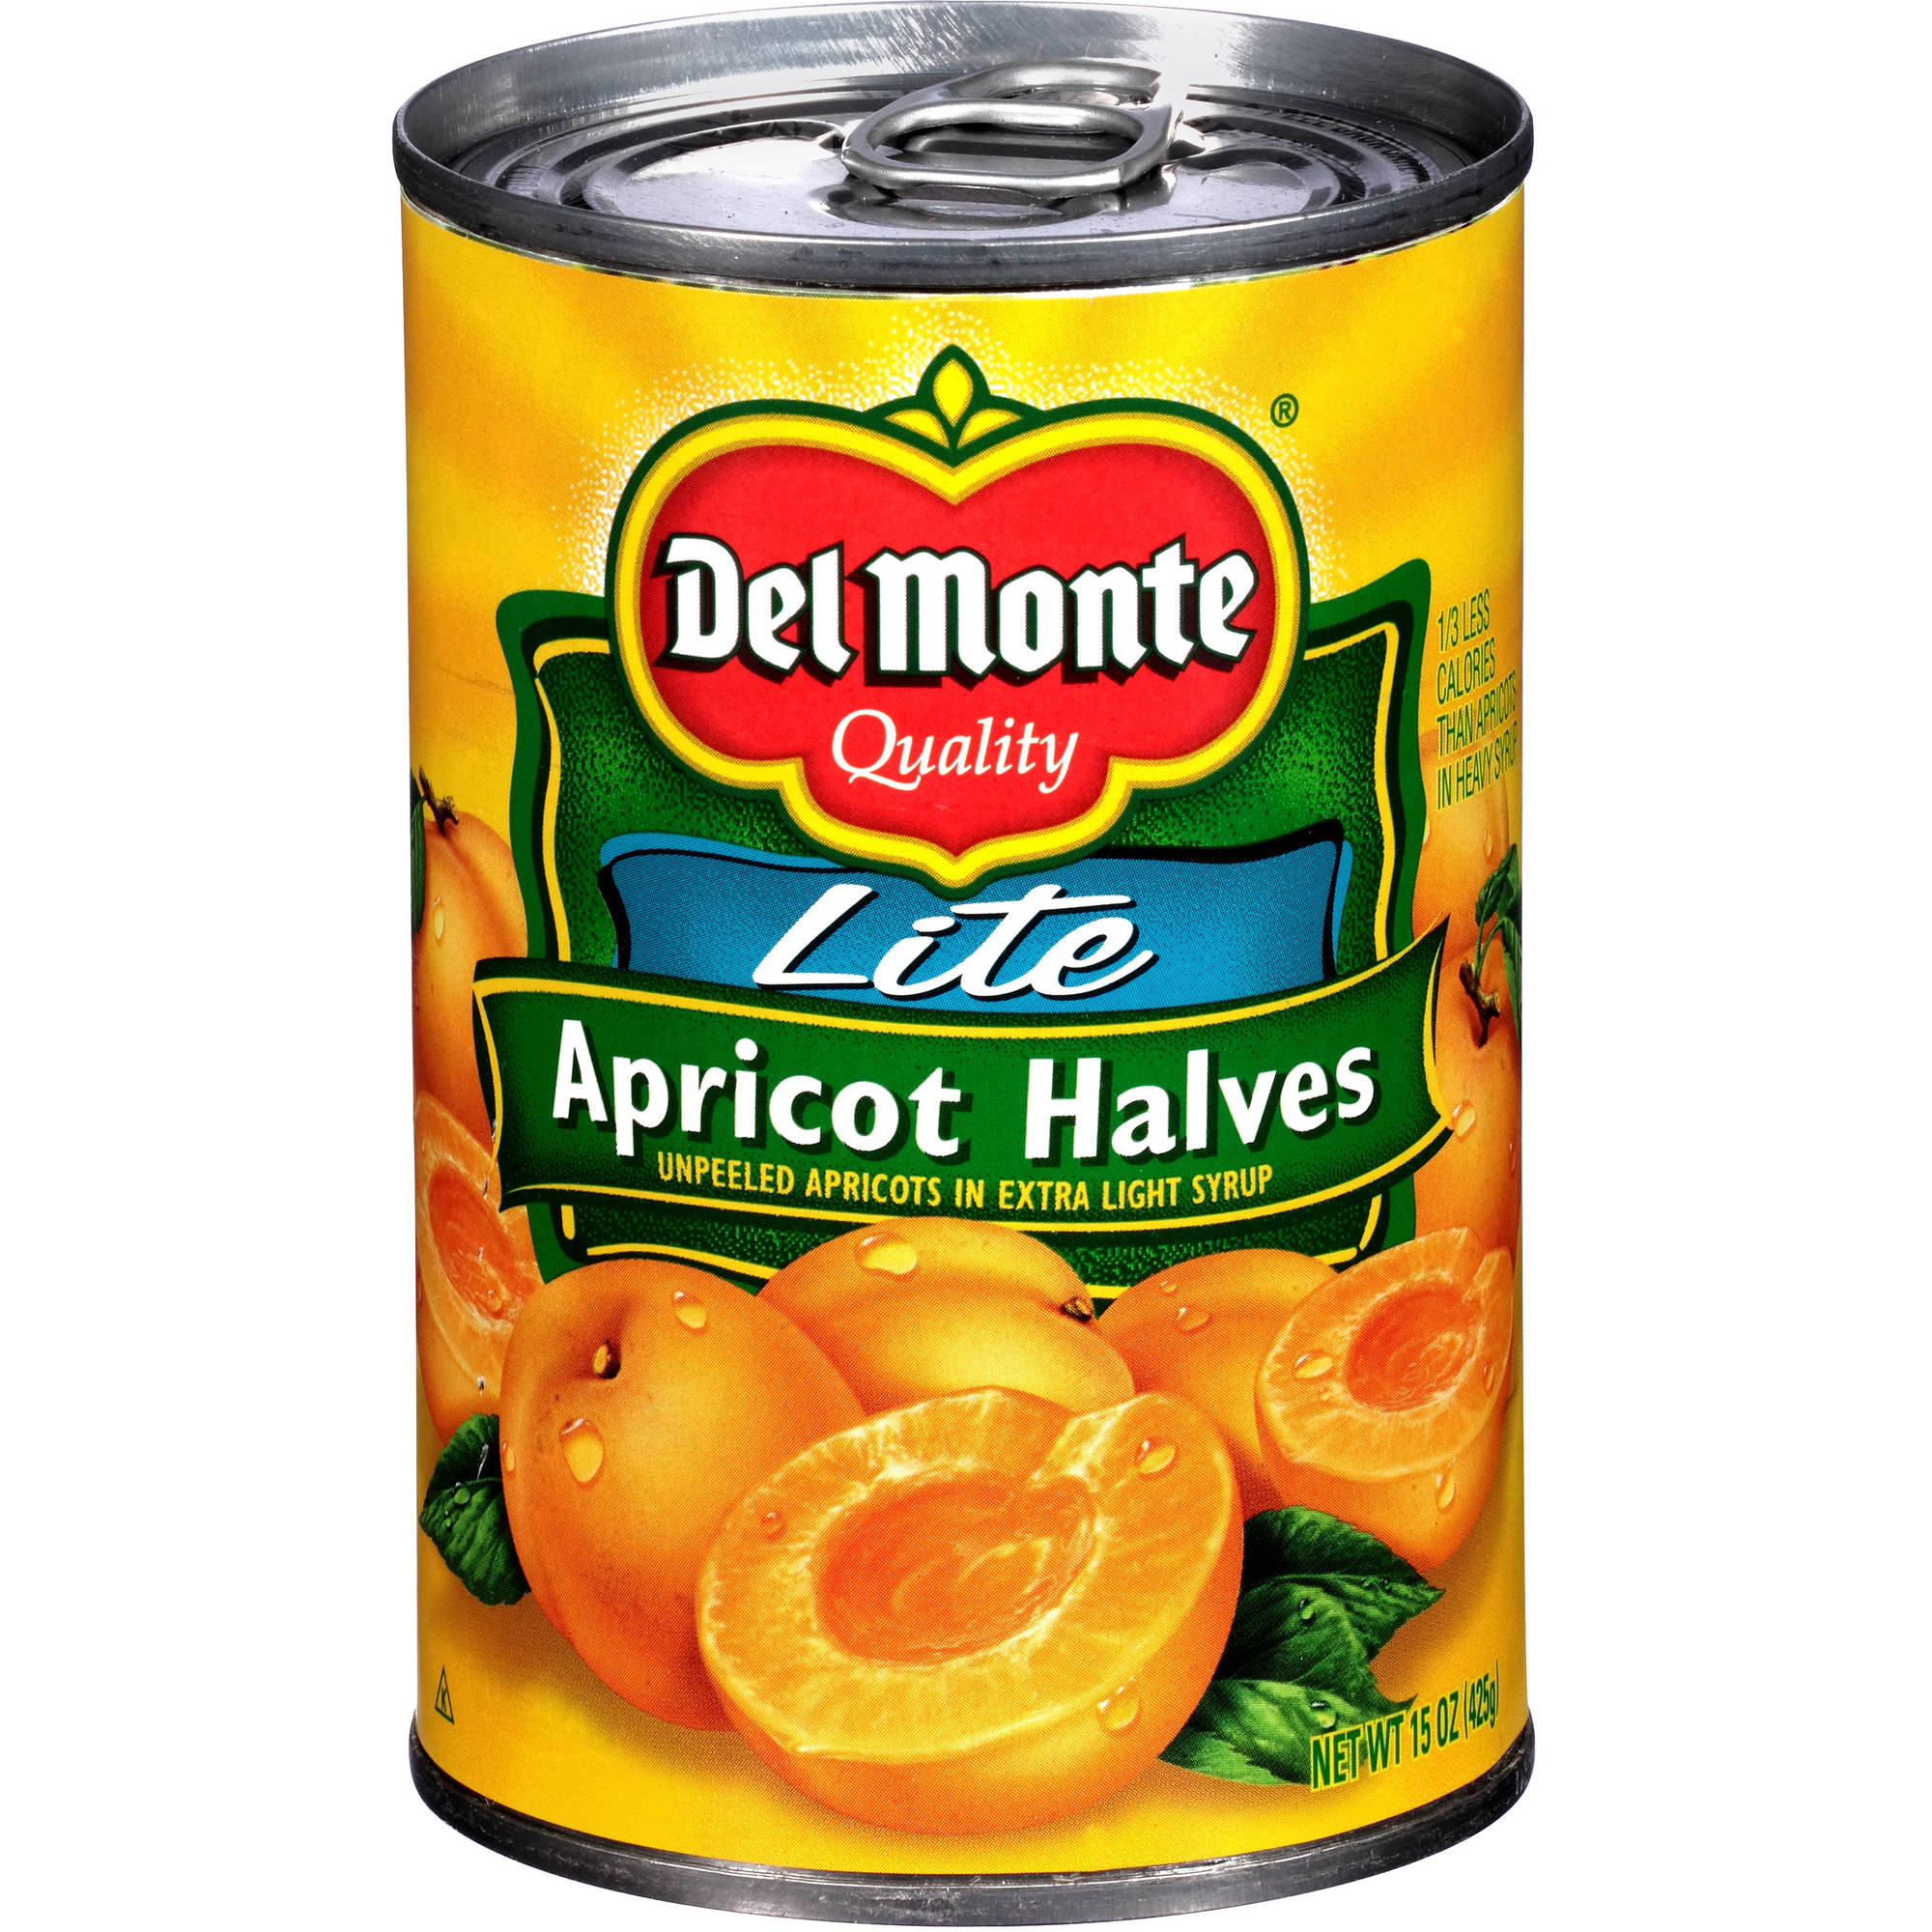 canned apricots havles